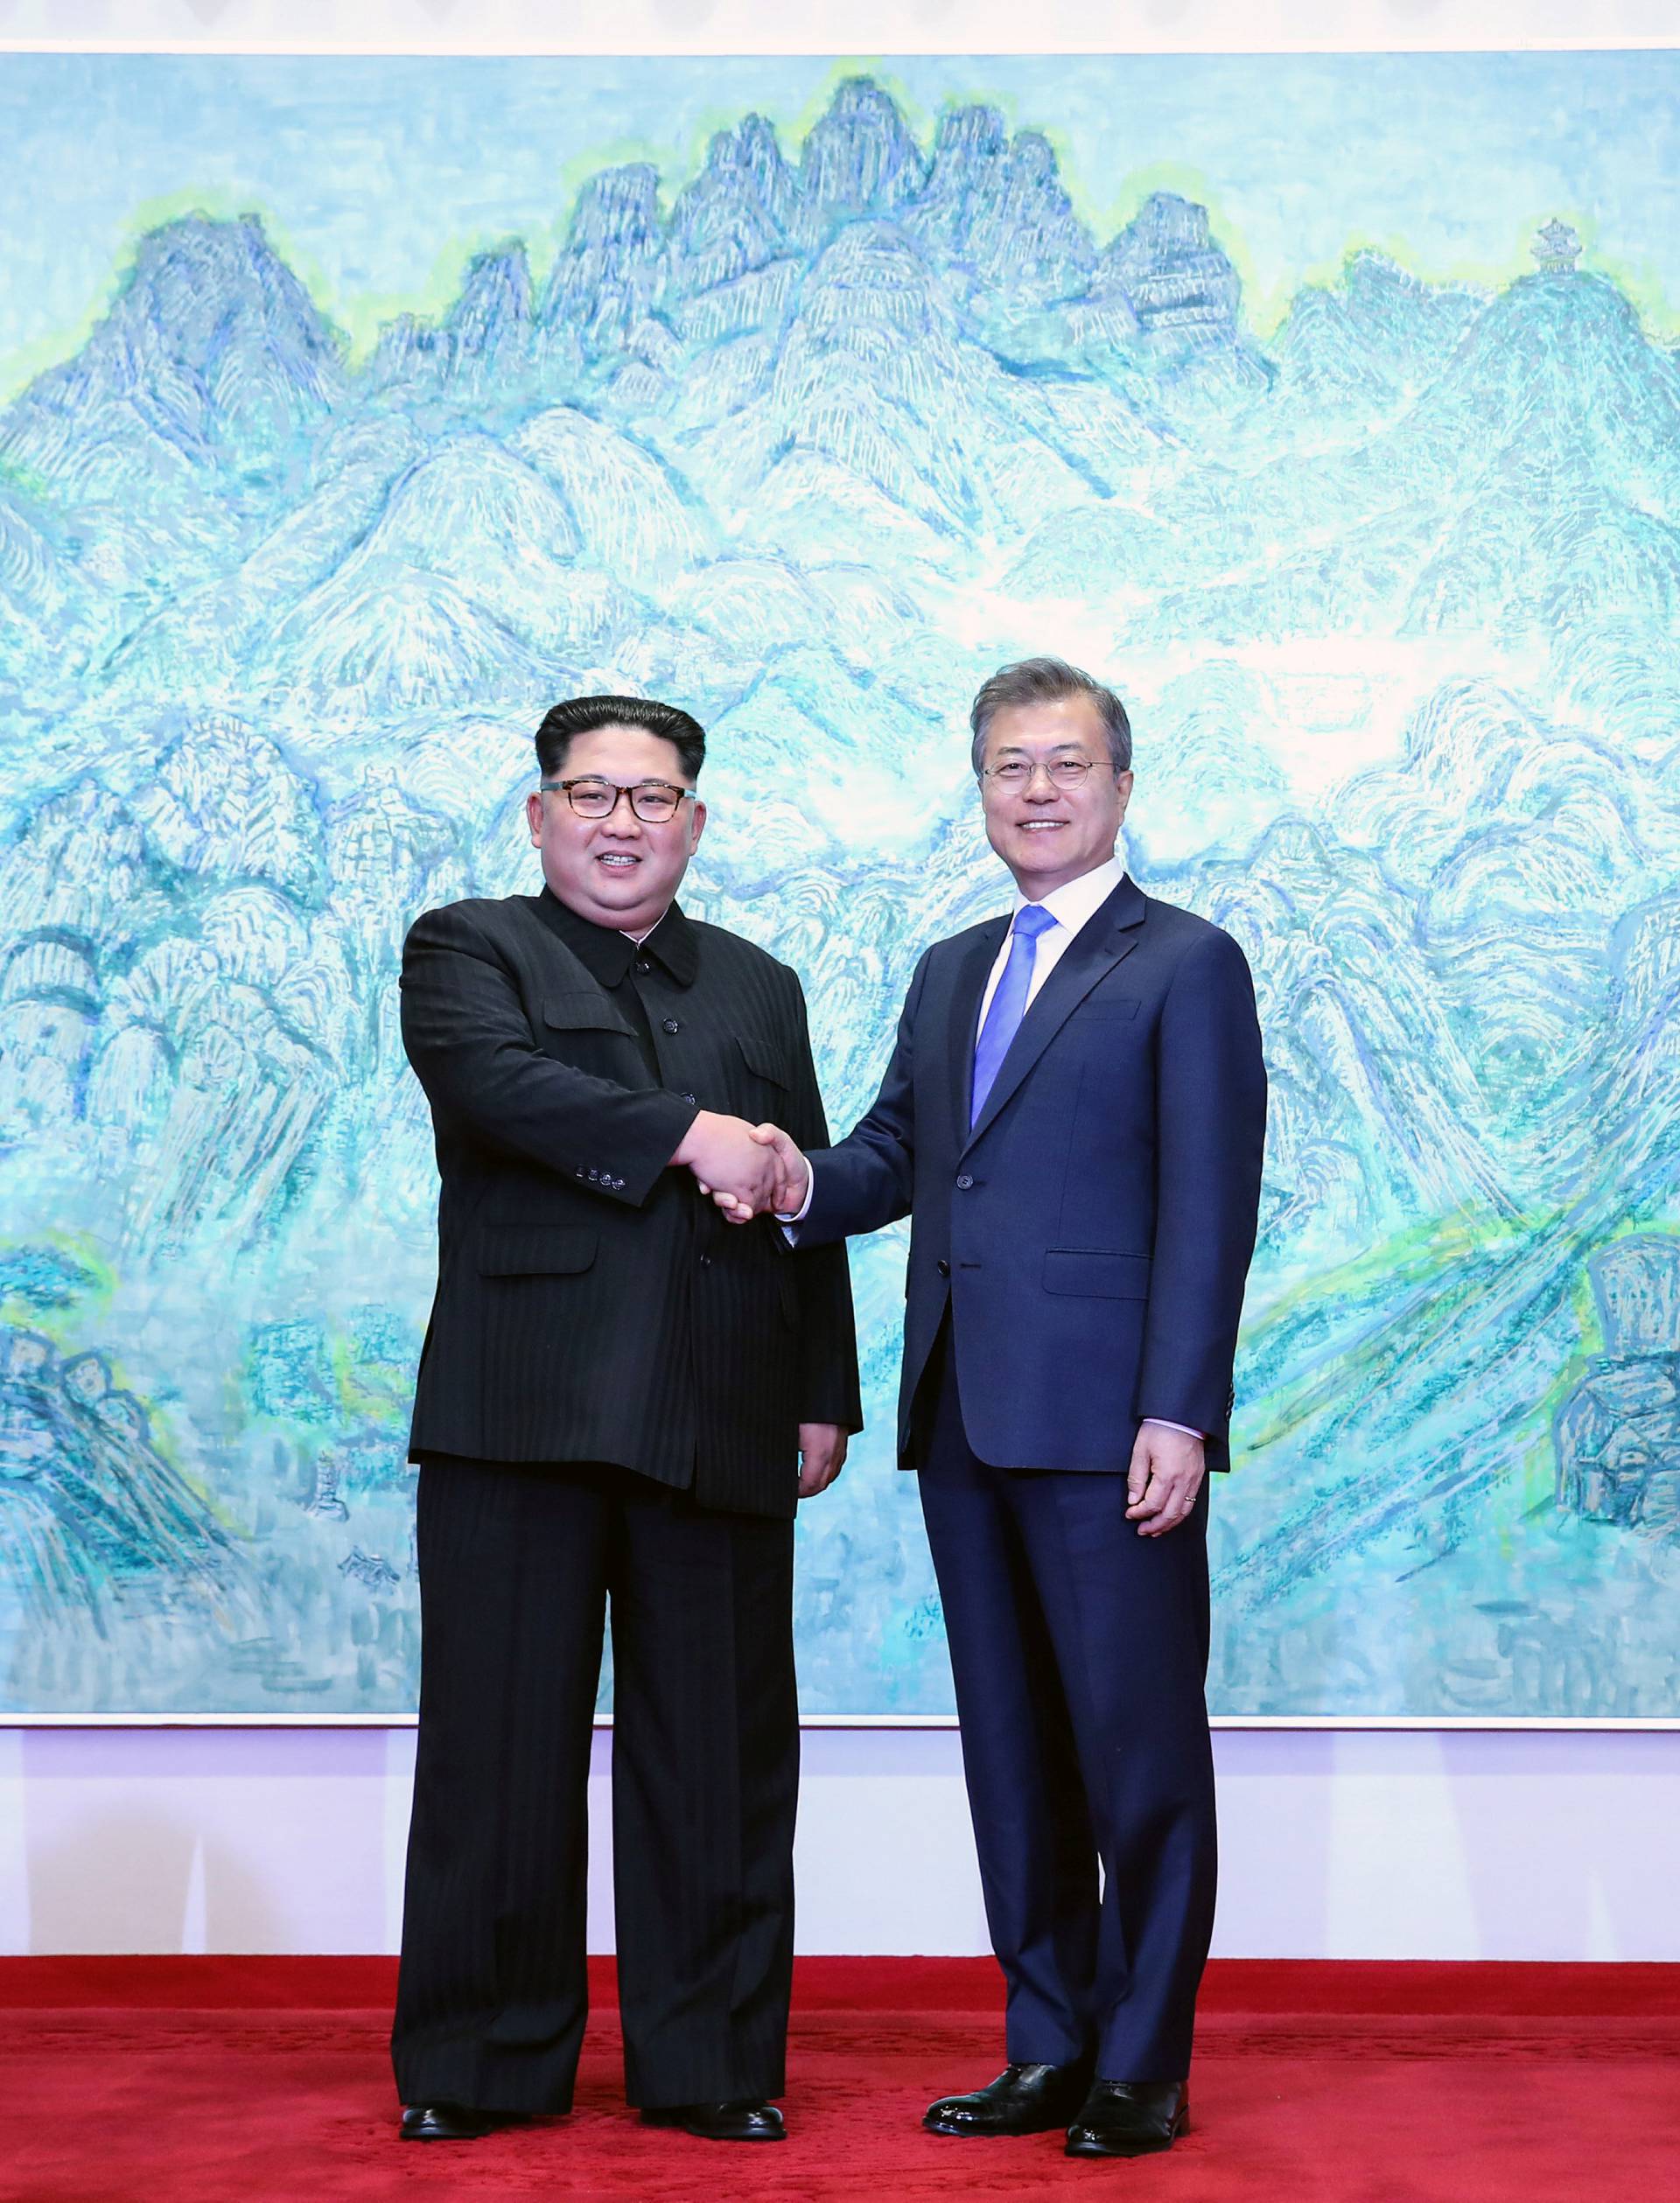 South Korean President Moon Jae-in shakes hands with North Korean leader Kim Jong Un during their meeting at the Peace House